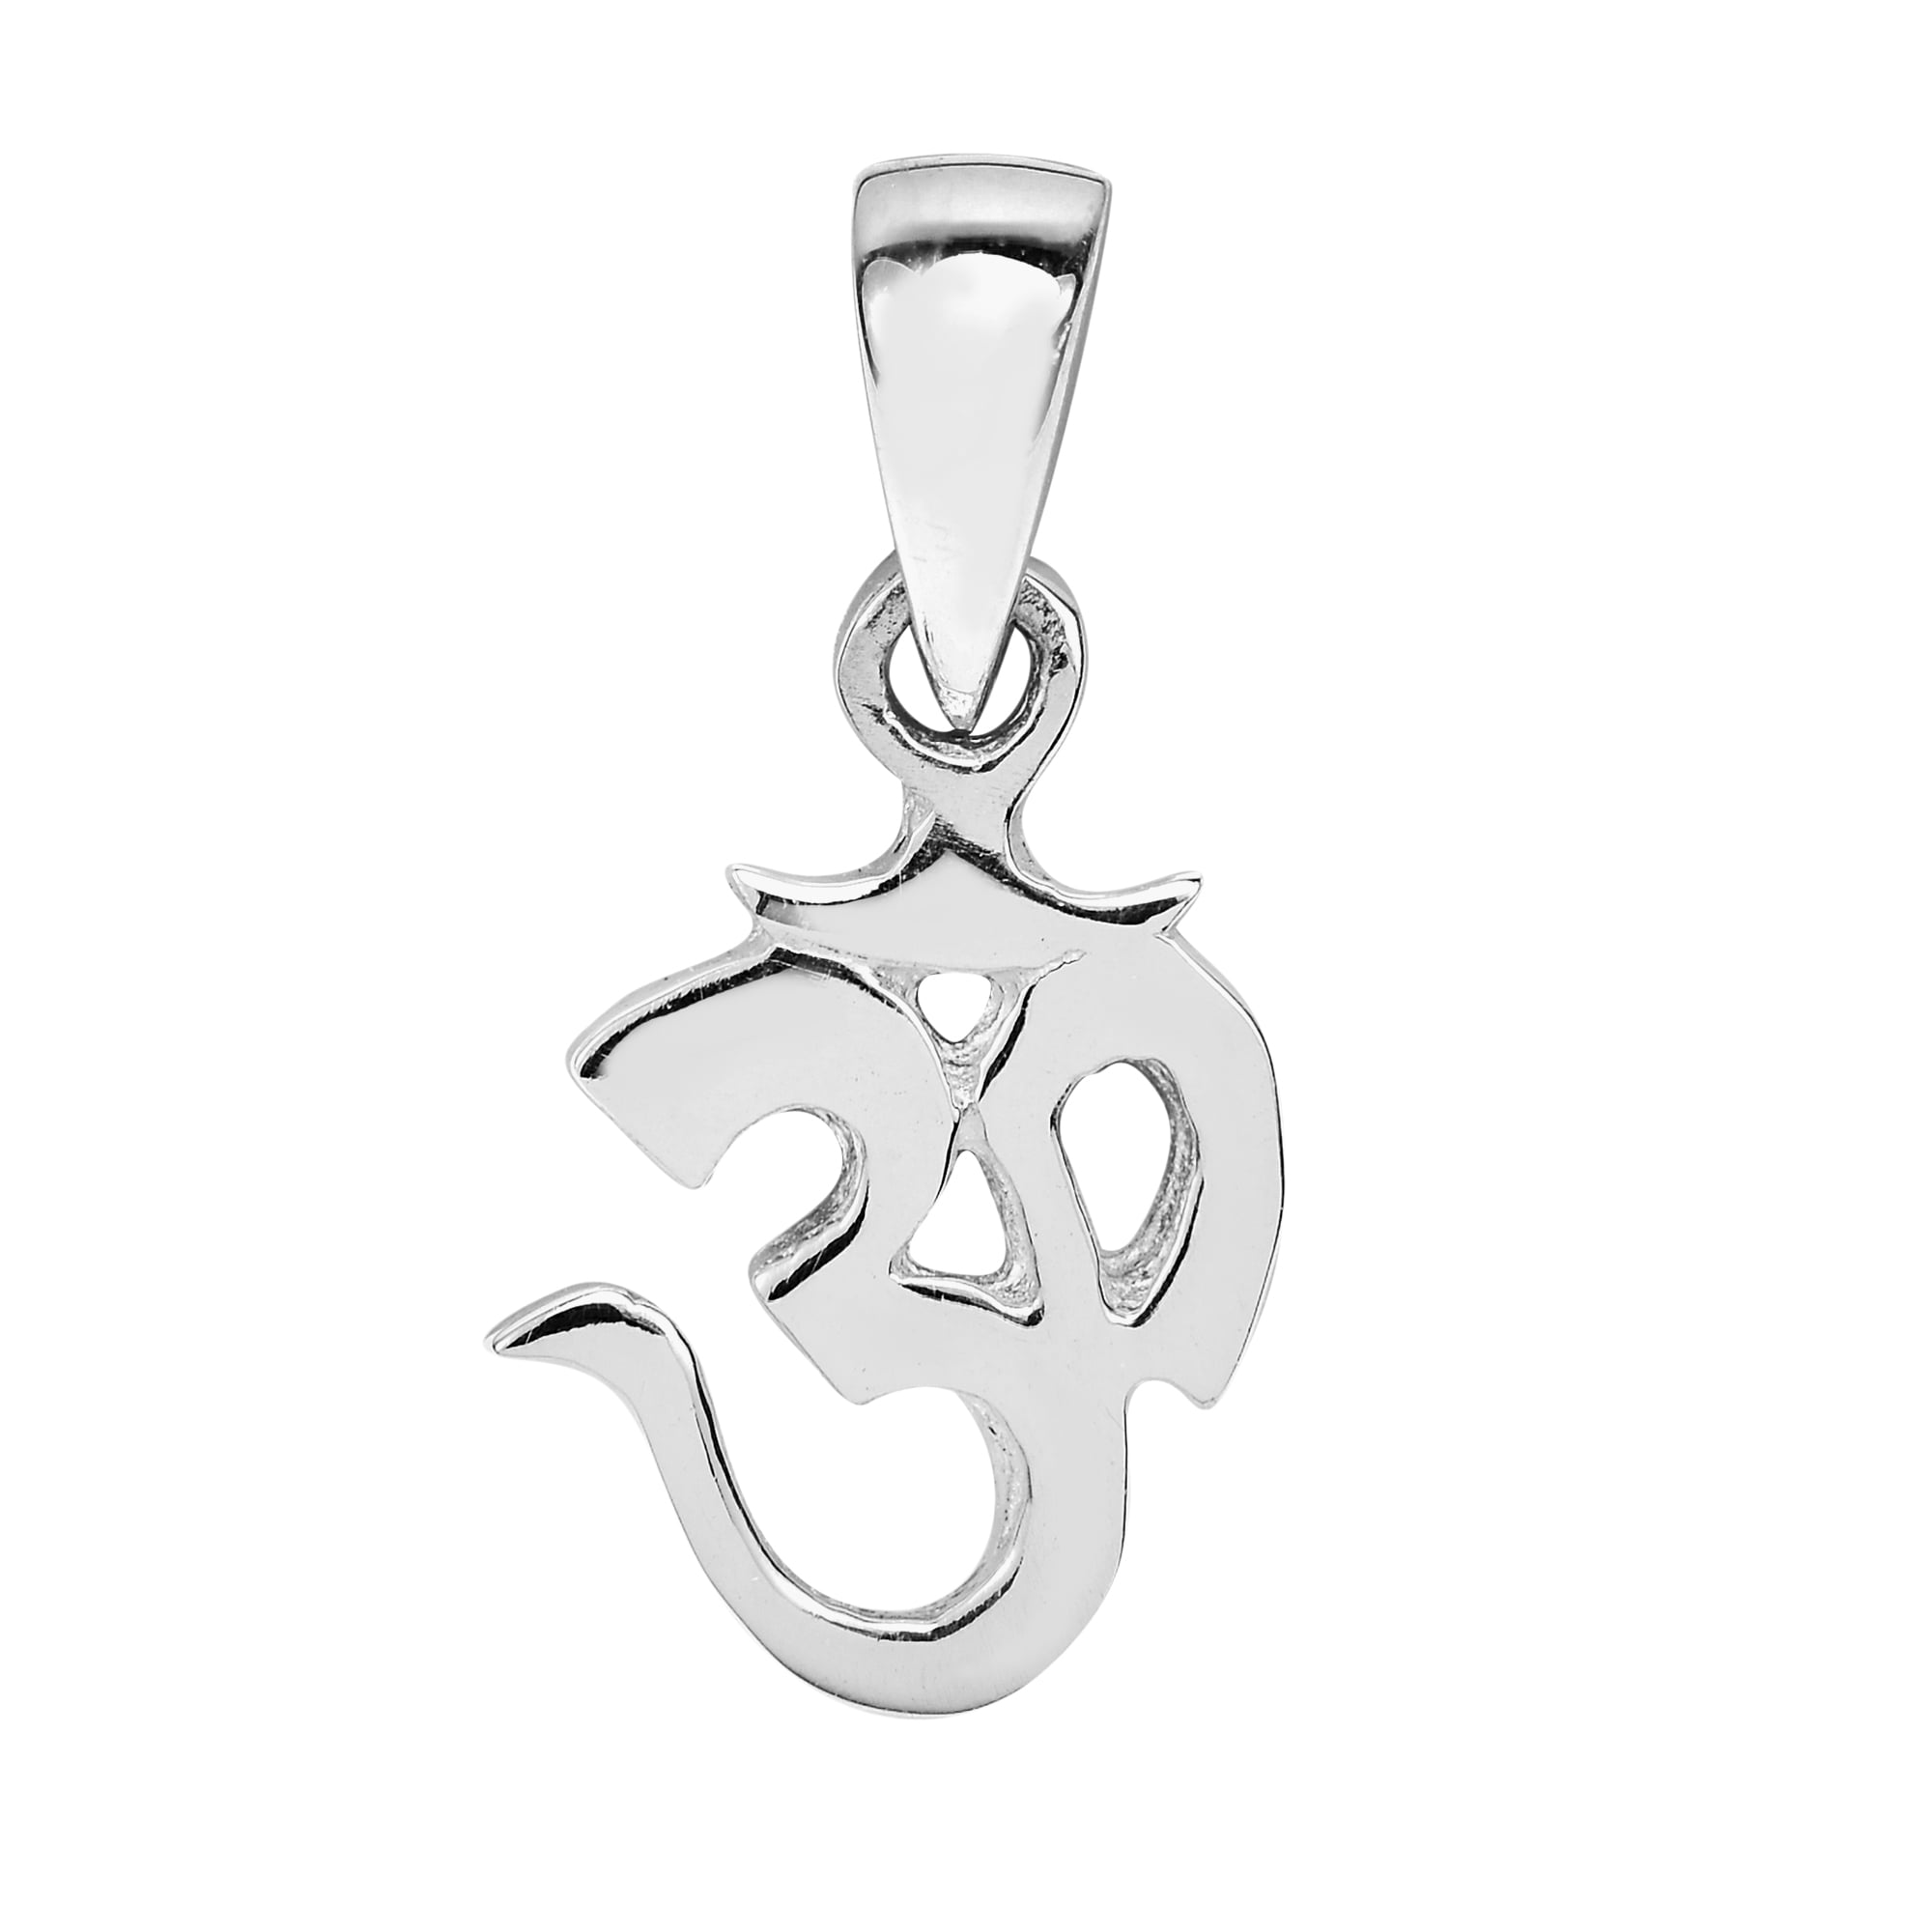 SMALL AUM OM STERLING SILVER PENDANT WITH HALLMARK 